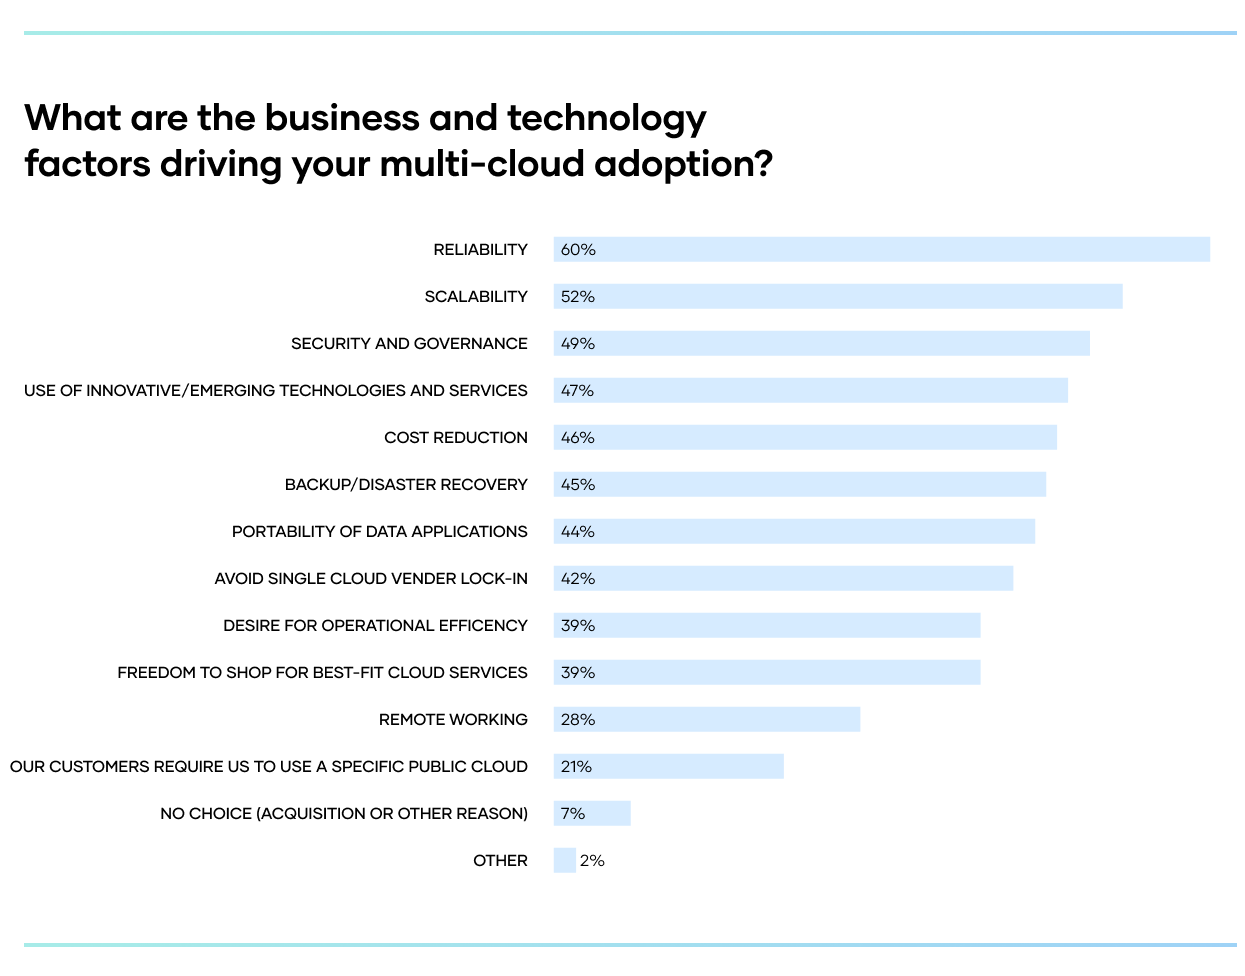 Bar chart: What are the business and technology factors driving your multi-cloud adoption